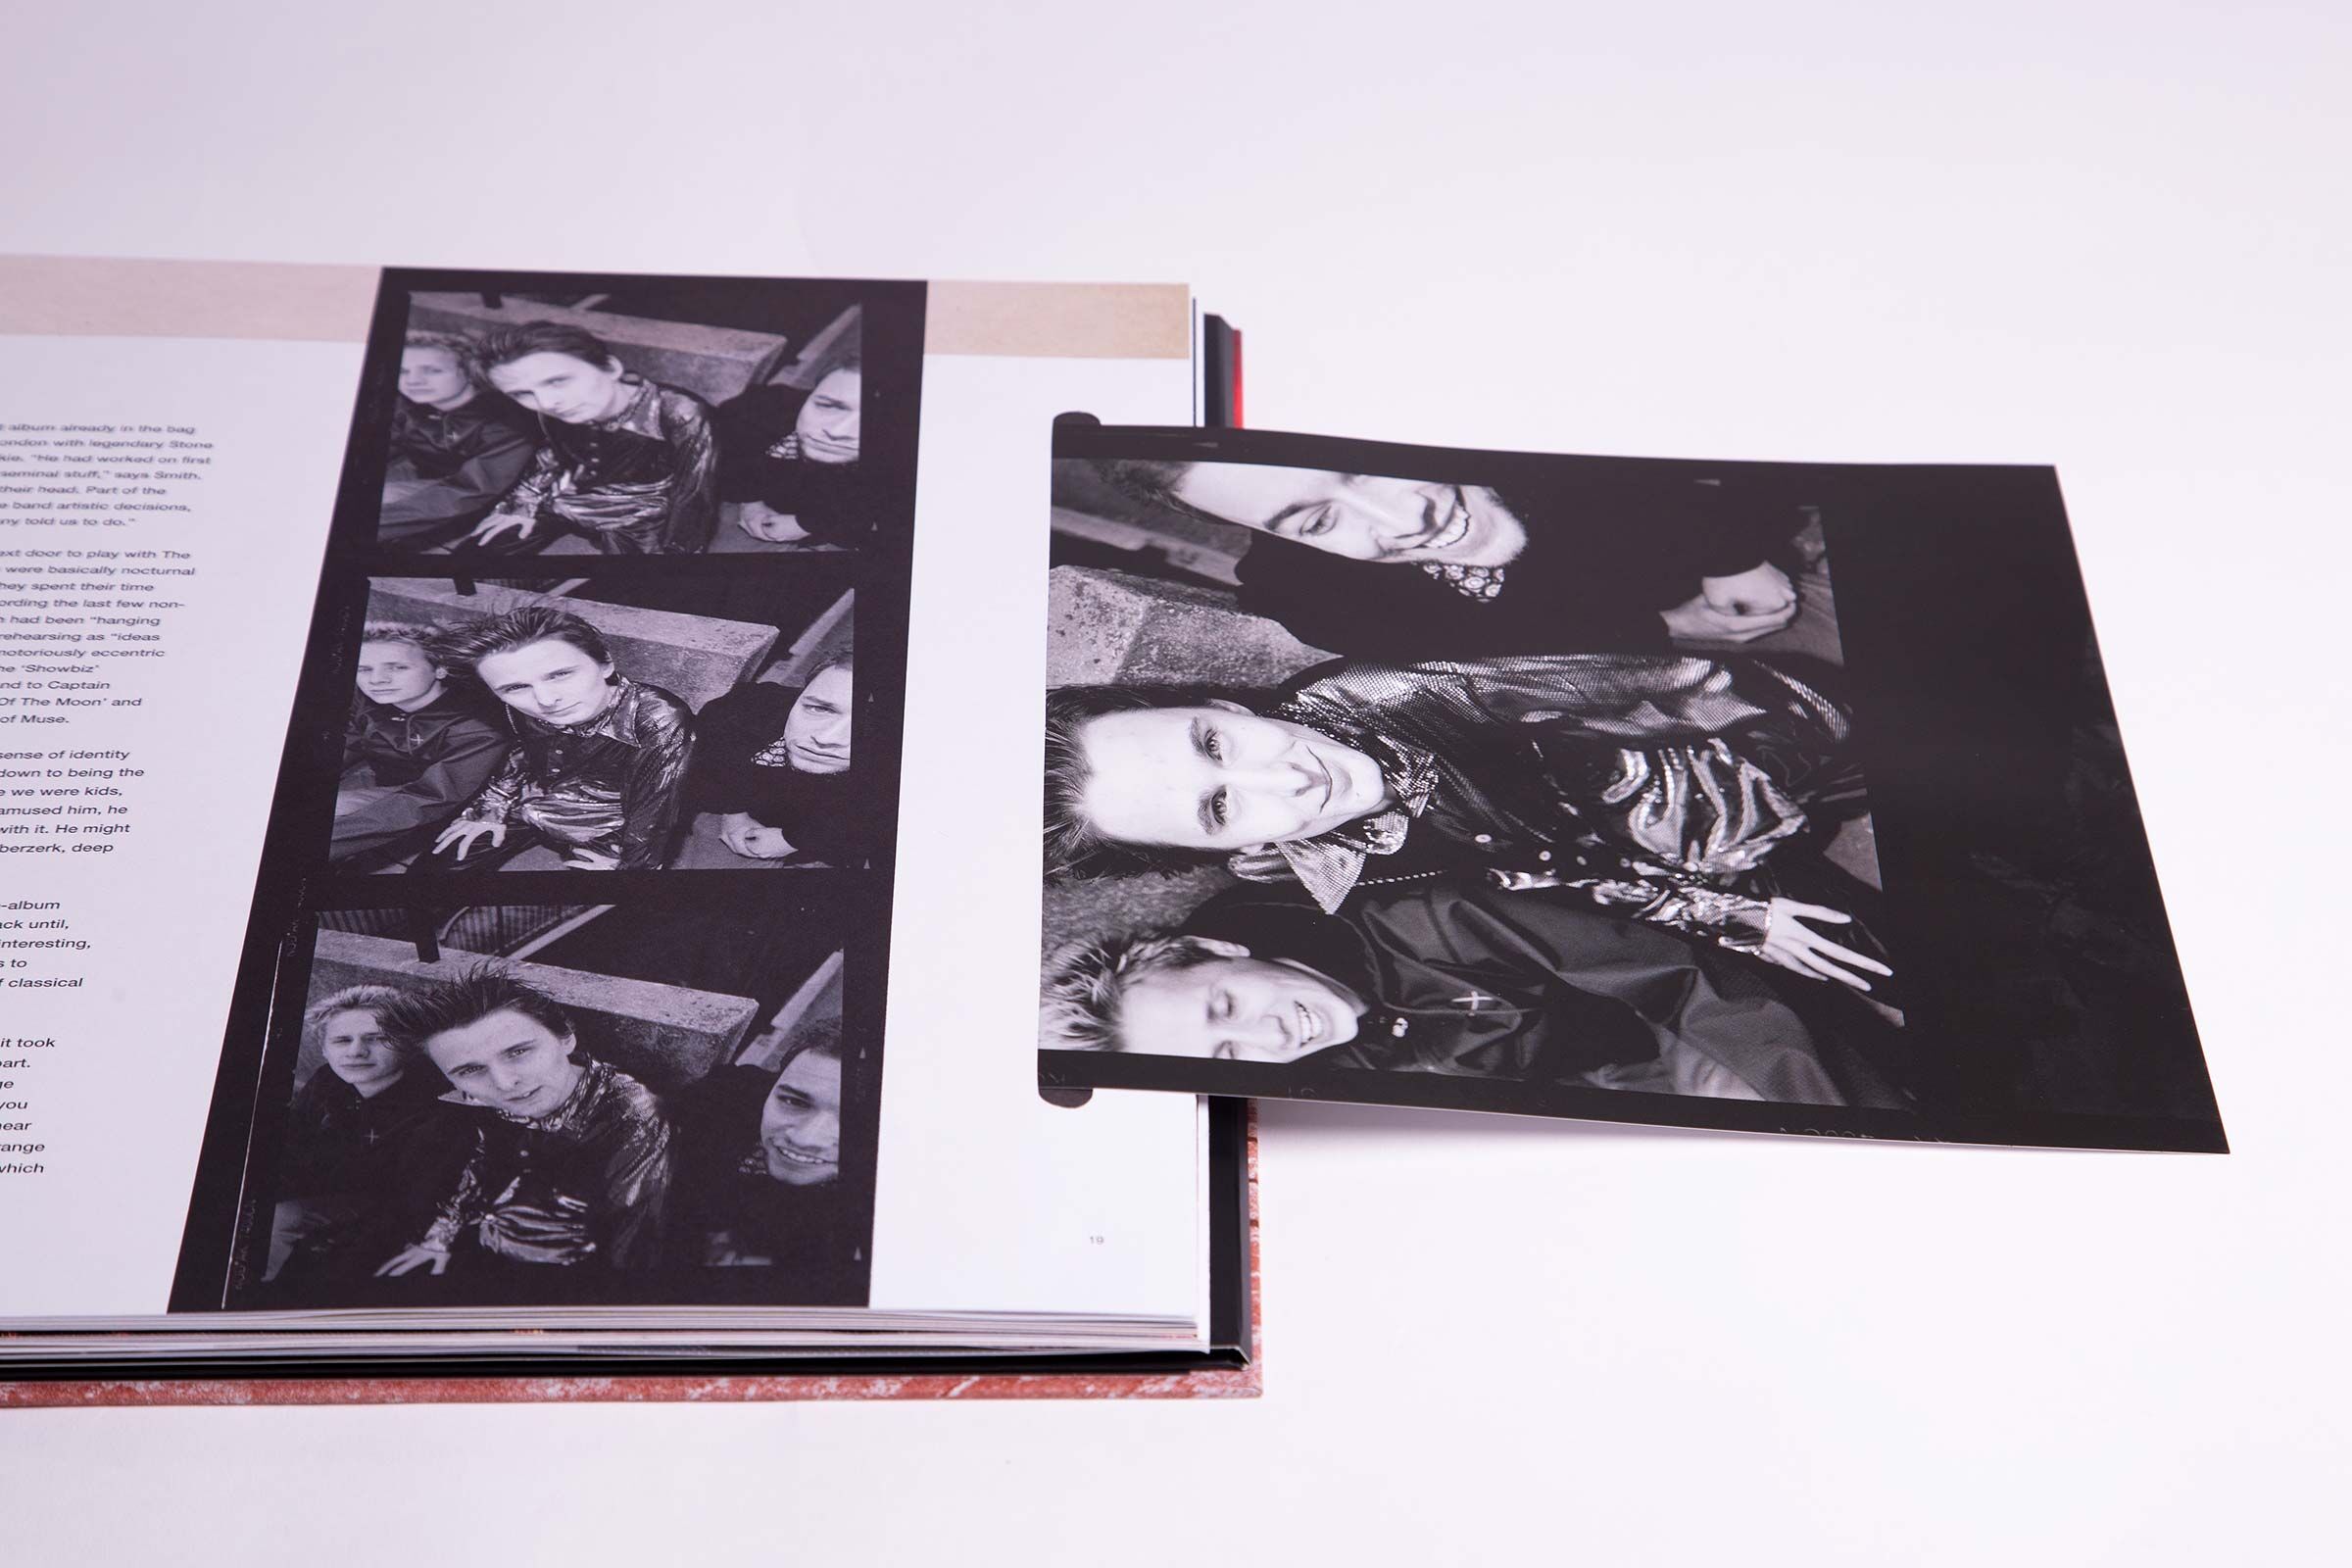 Origin of Muse 48 page casebound book with Photographs